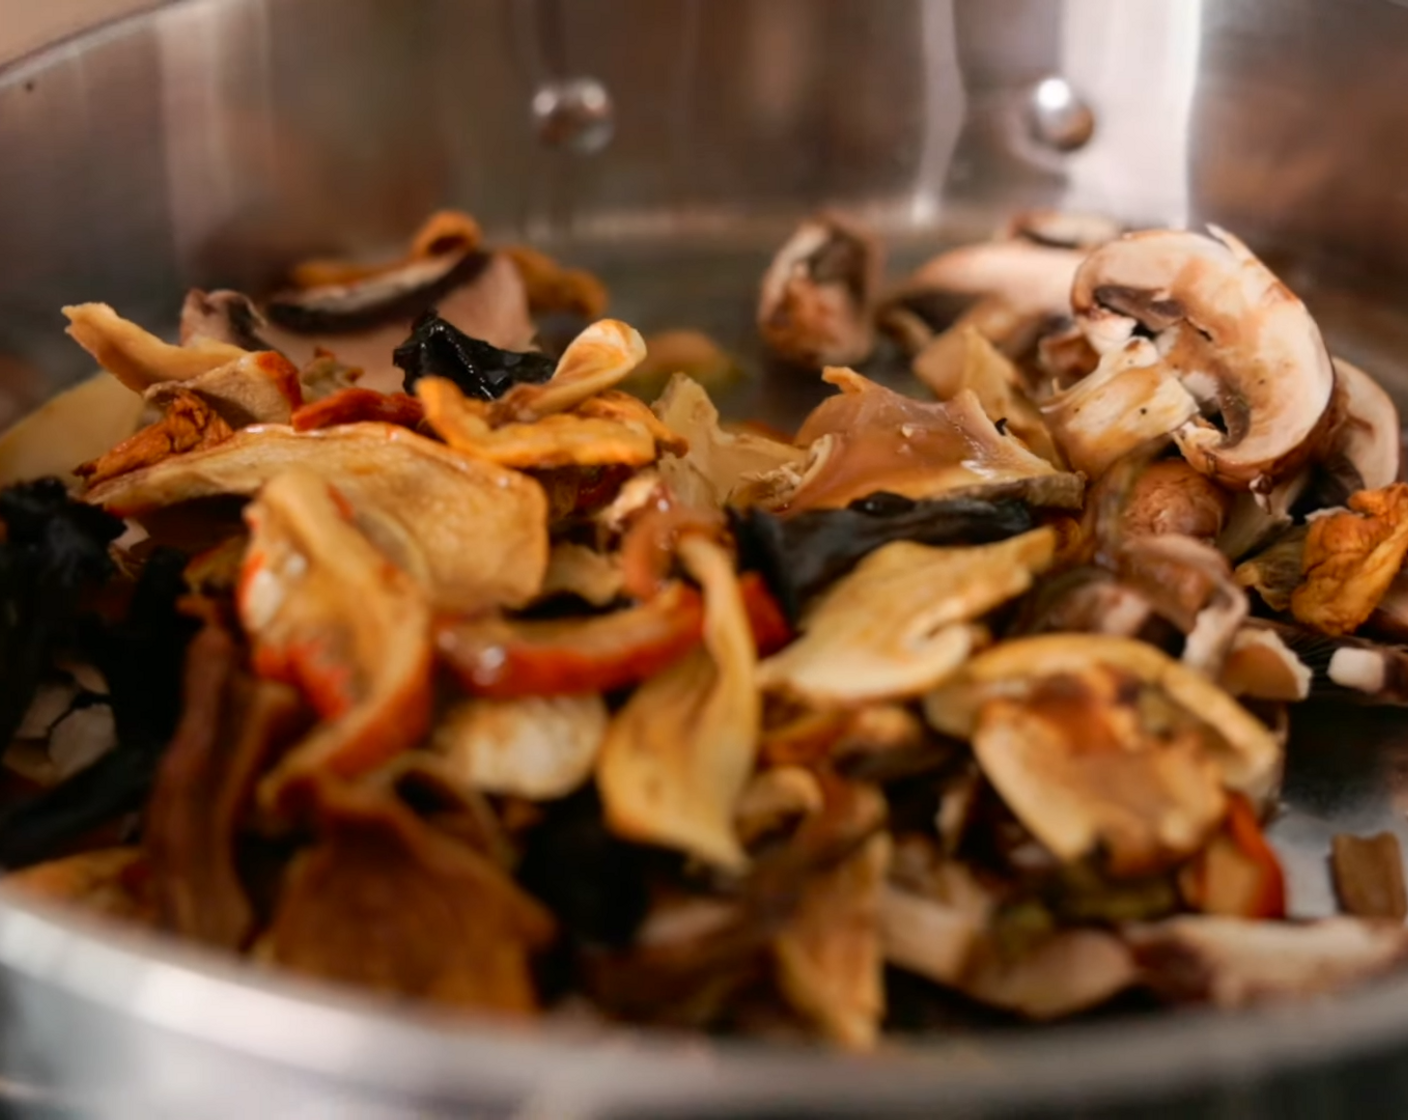 step 7 Next, add re-hydrated wild mushrooms. If the pan starts getting dry, add more olive oil or a splash of water.